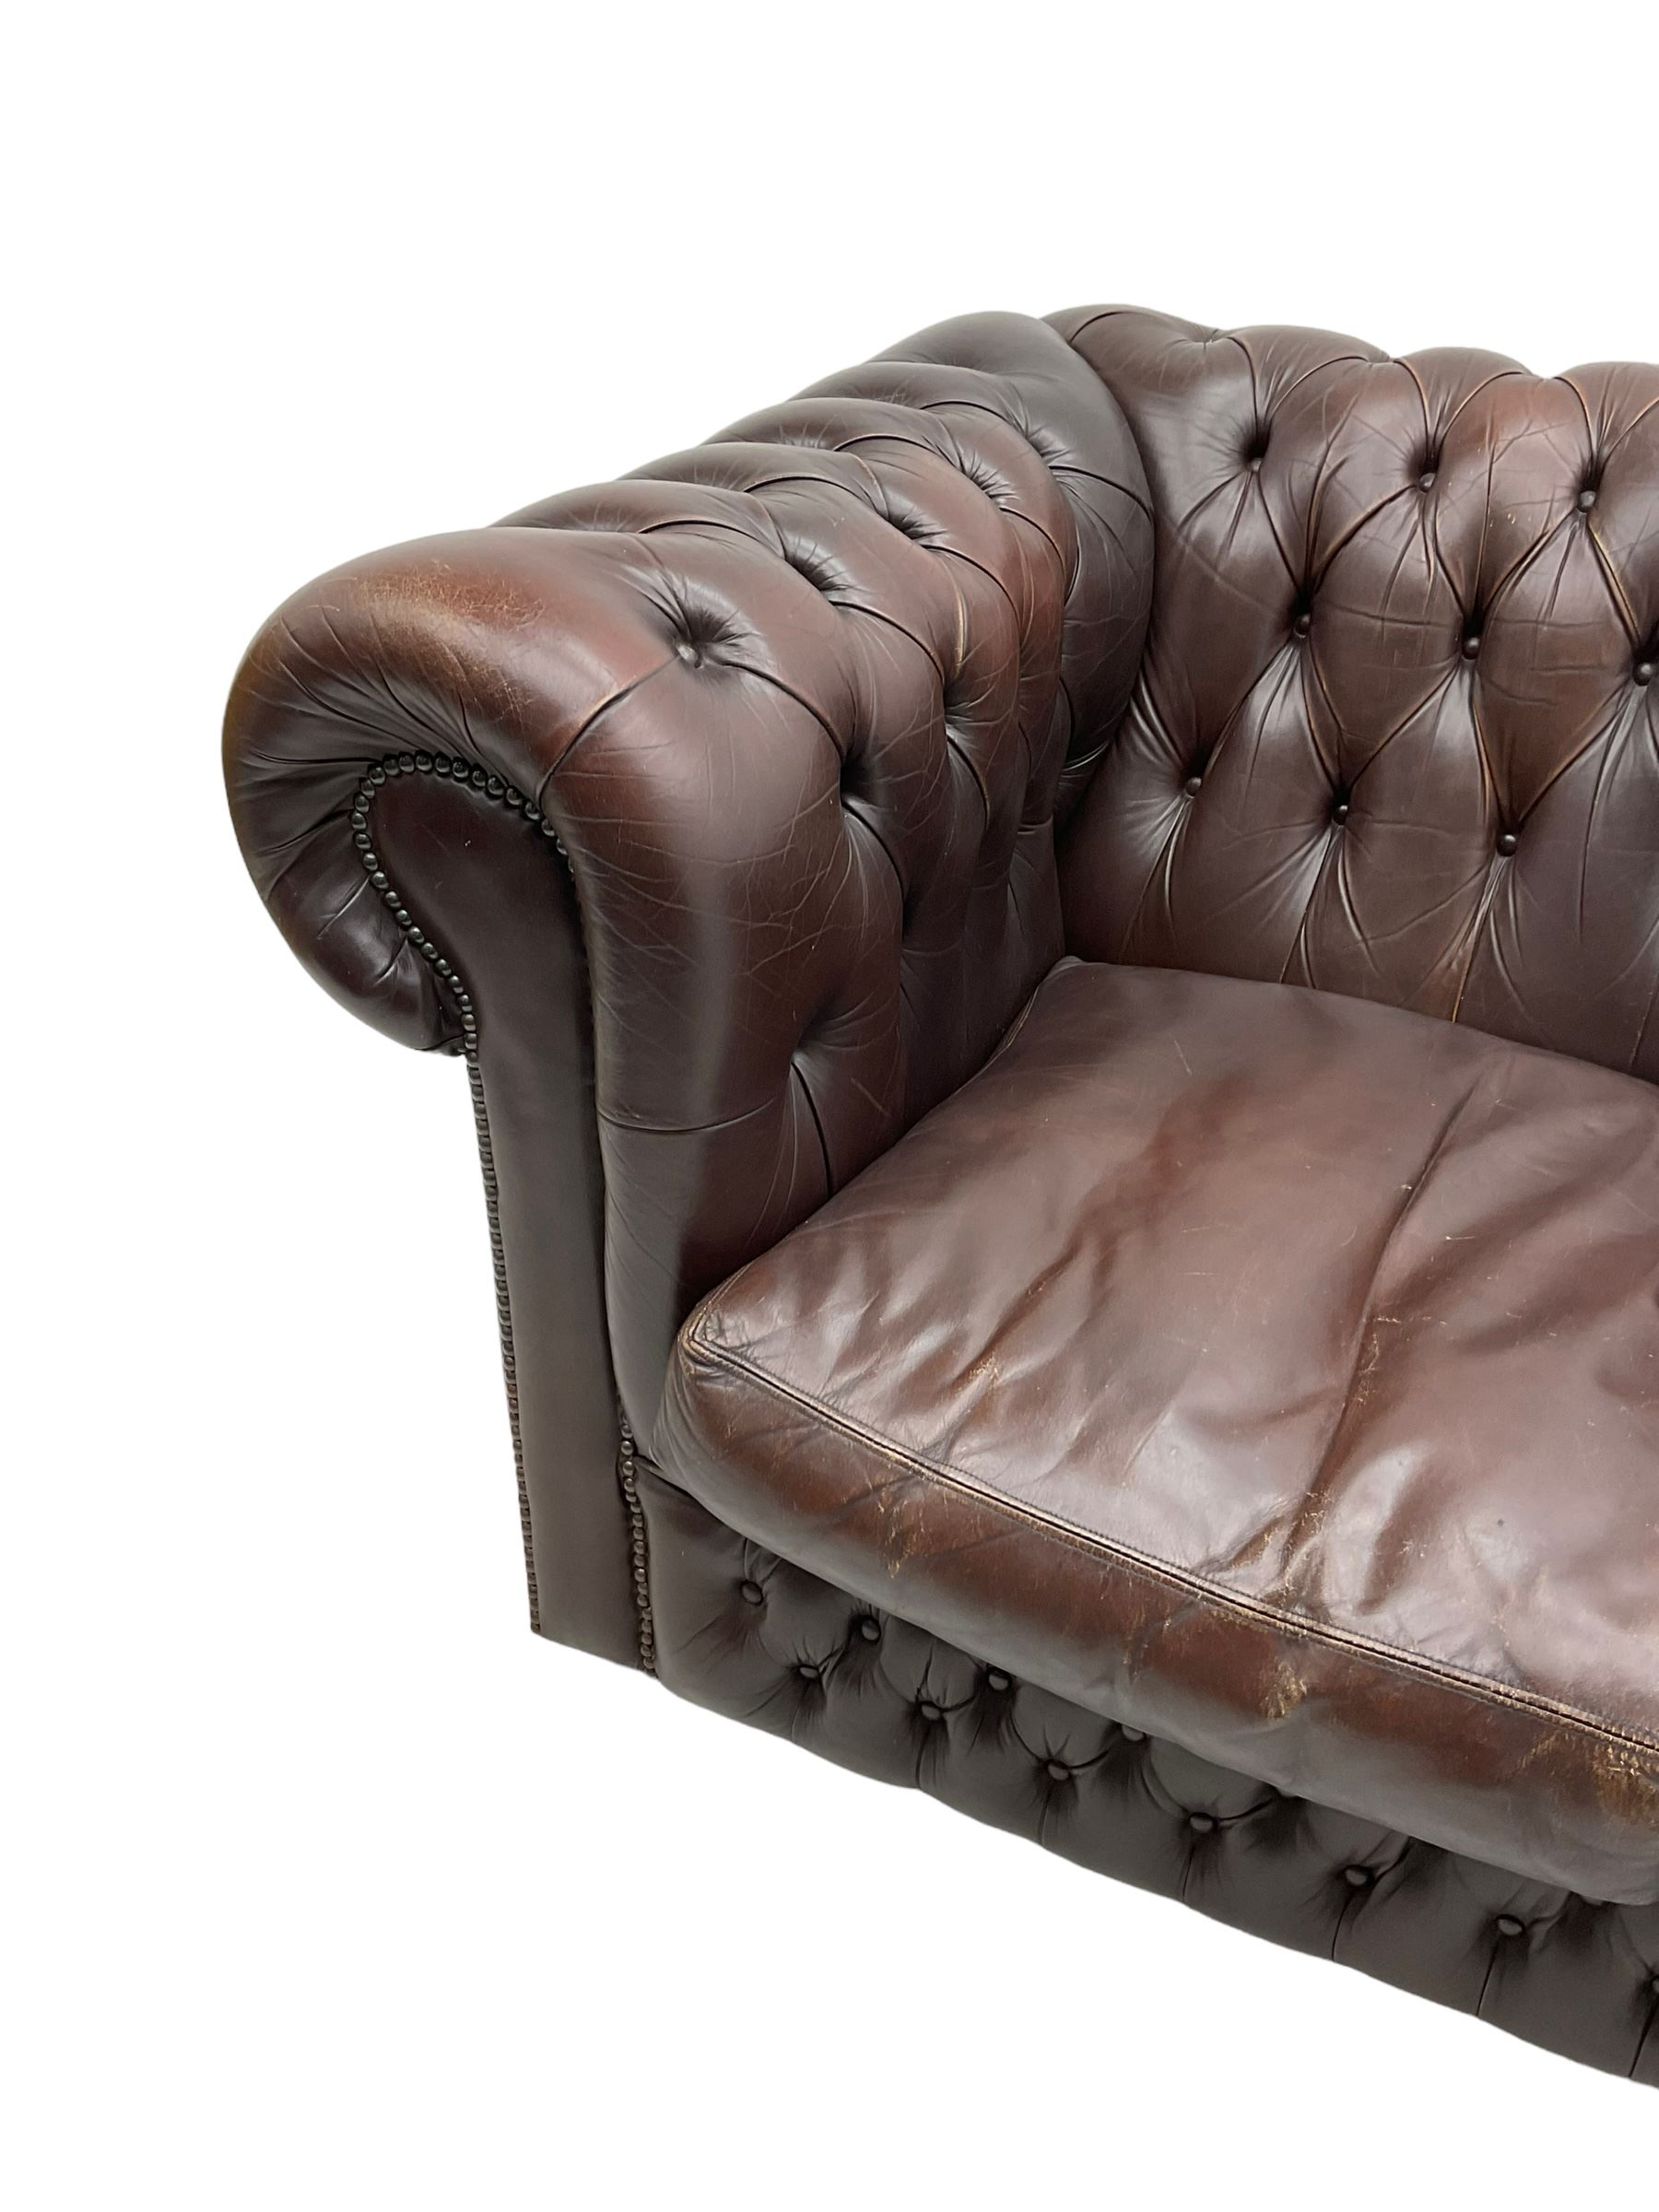 Three-seat Chesterfield sofa - Image 4 of 5